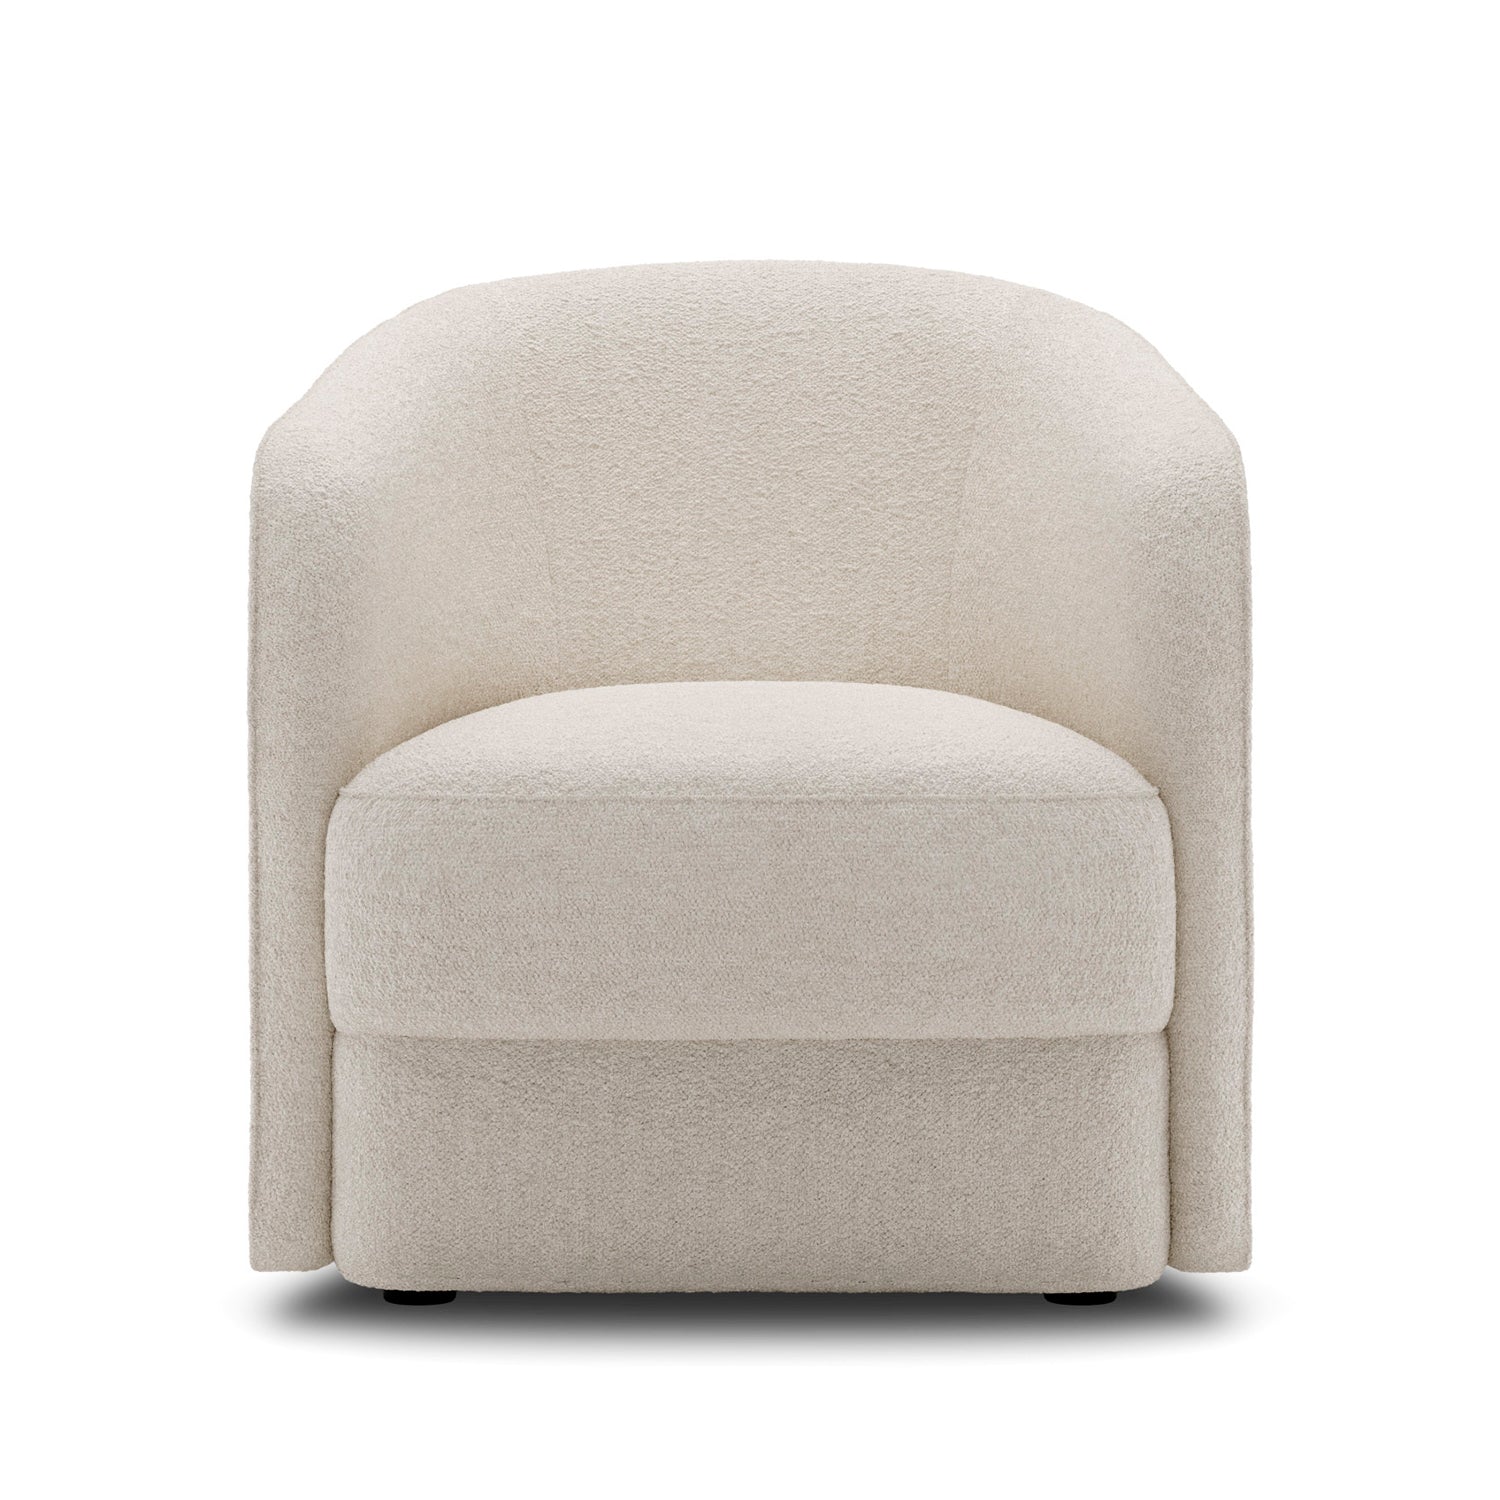 New Works Covent Lounge Chair Narrow in lana beige